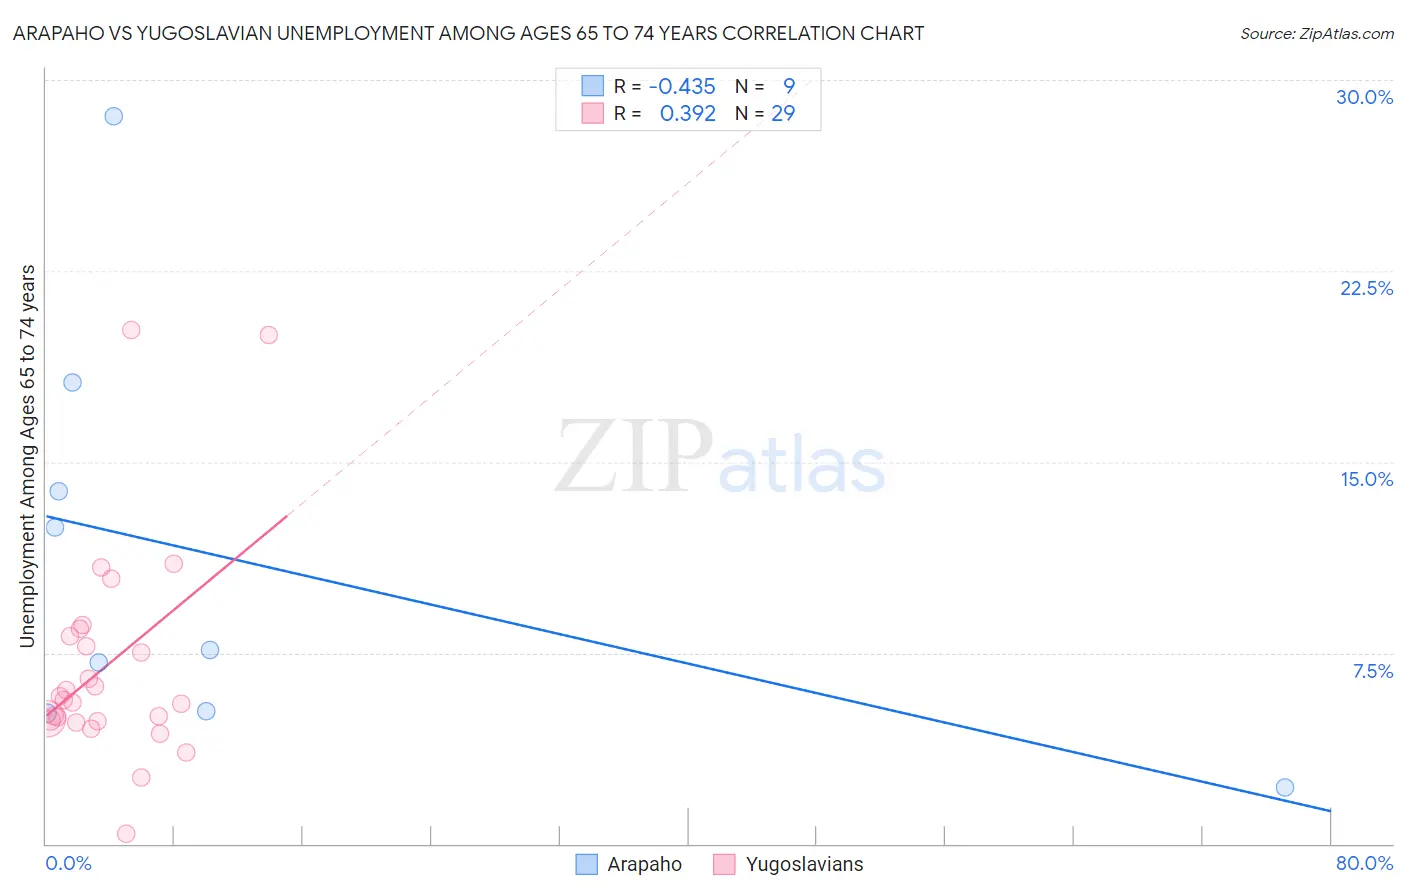 Arapaho vs Yugoslavian Unemployment Among Ages 65 to 74 years